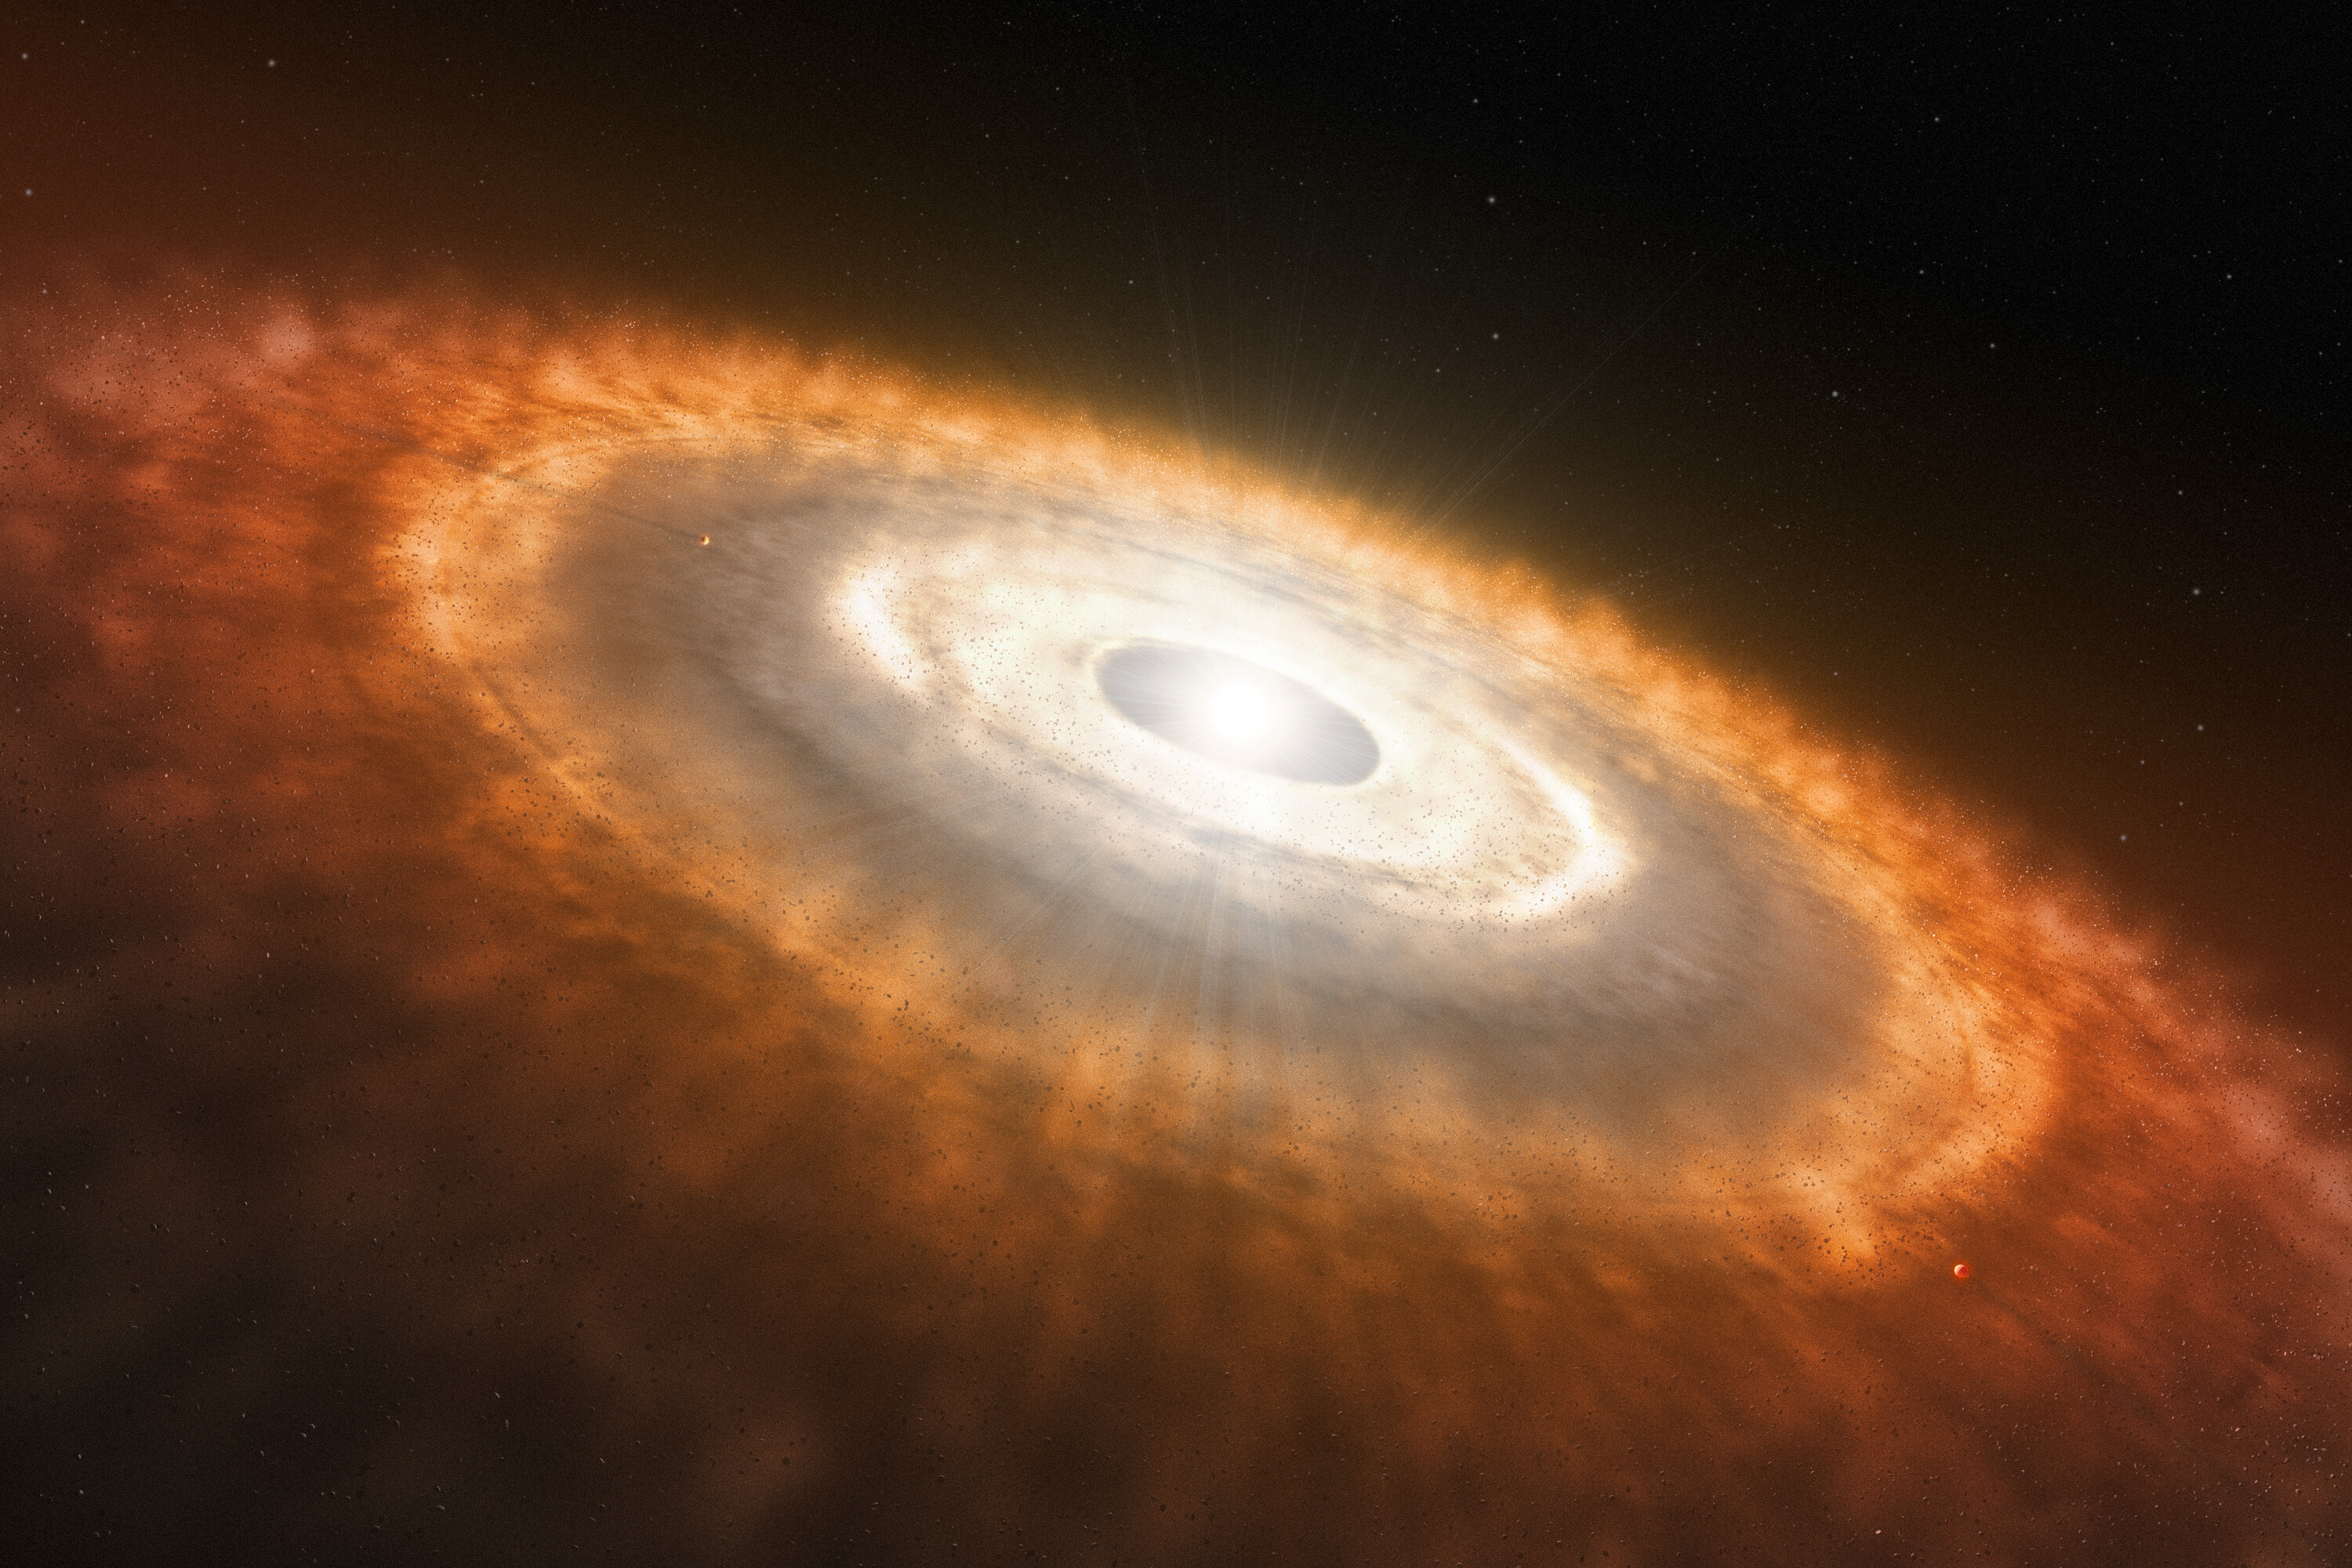 Artist’s impression of weic2329a protoplanetary disc